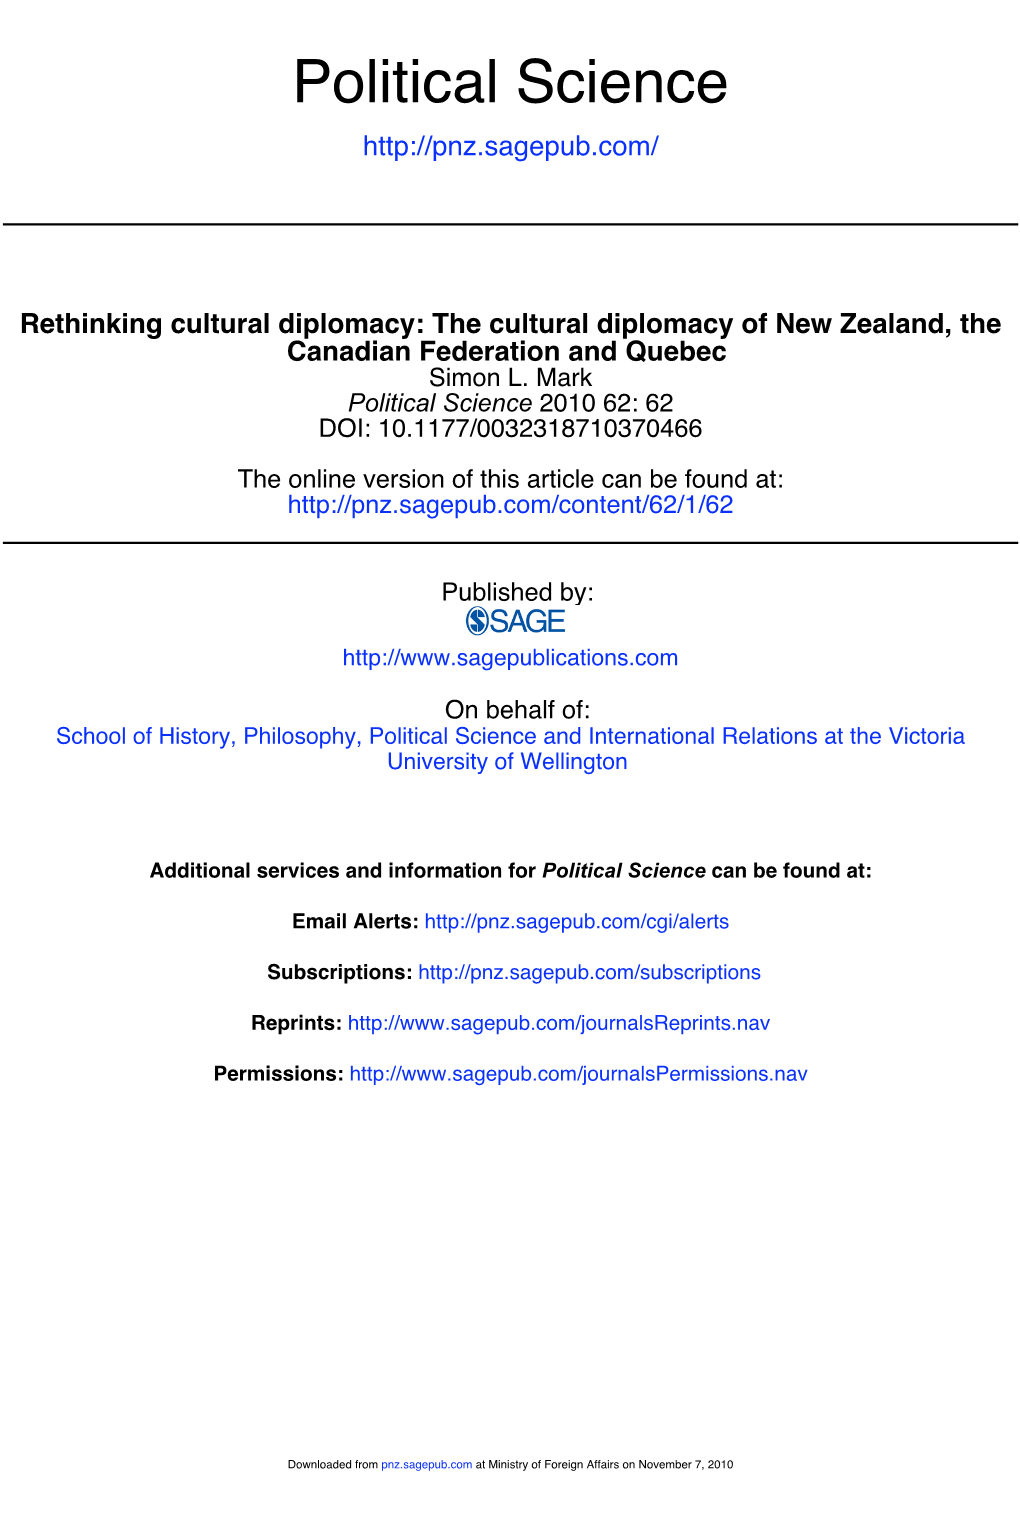 Rethinking Cultural Diplomacy: the Cultural Diplomacy of New Zealand, the Canadian Federation and Quebec Simon L